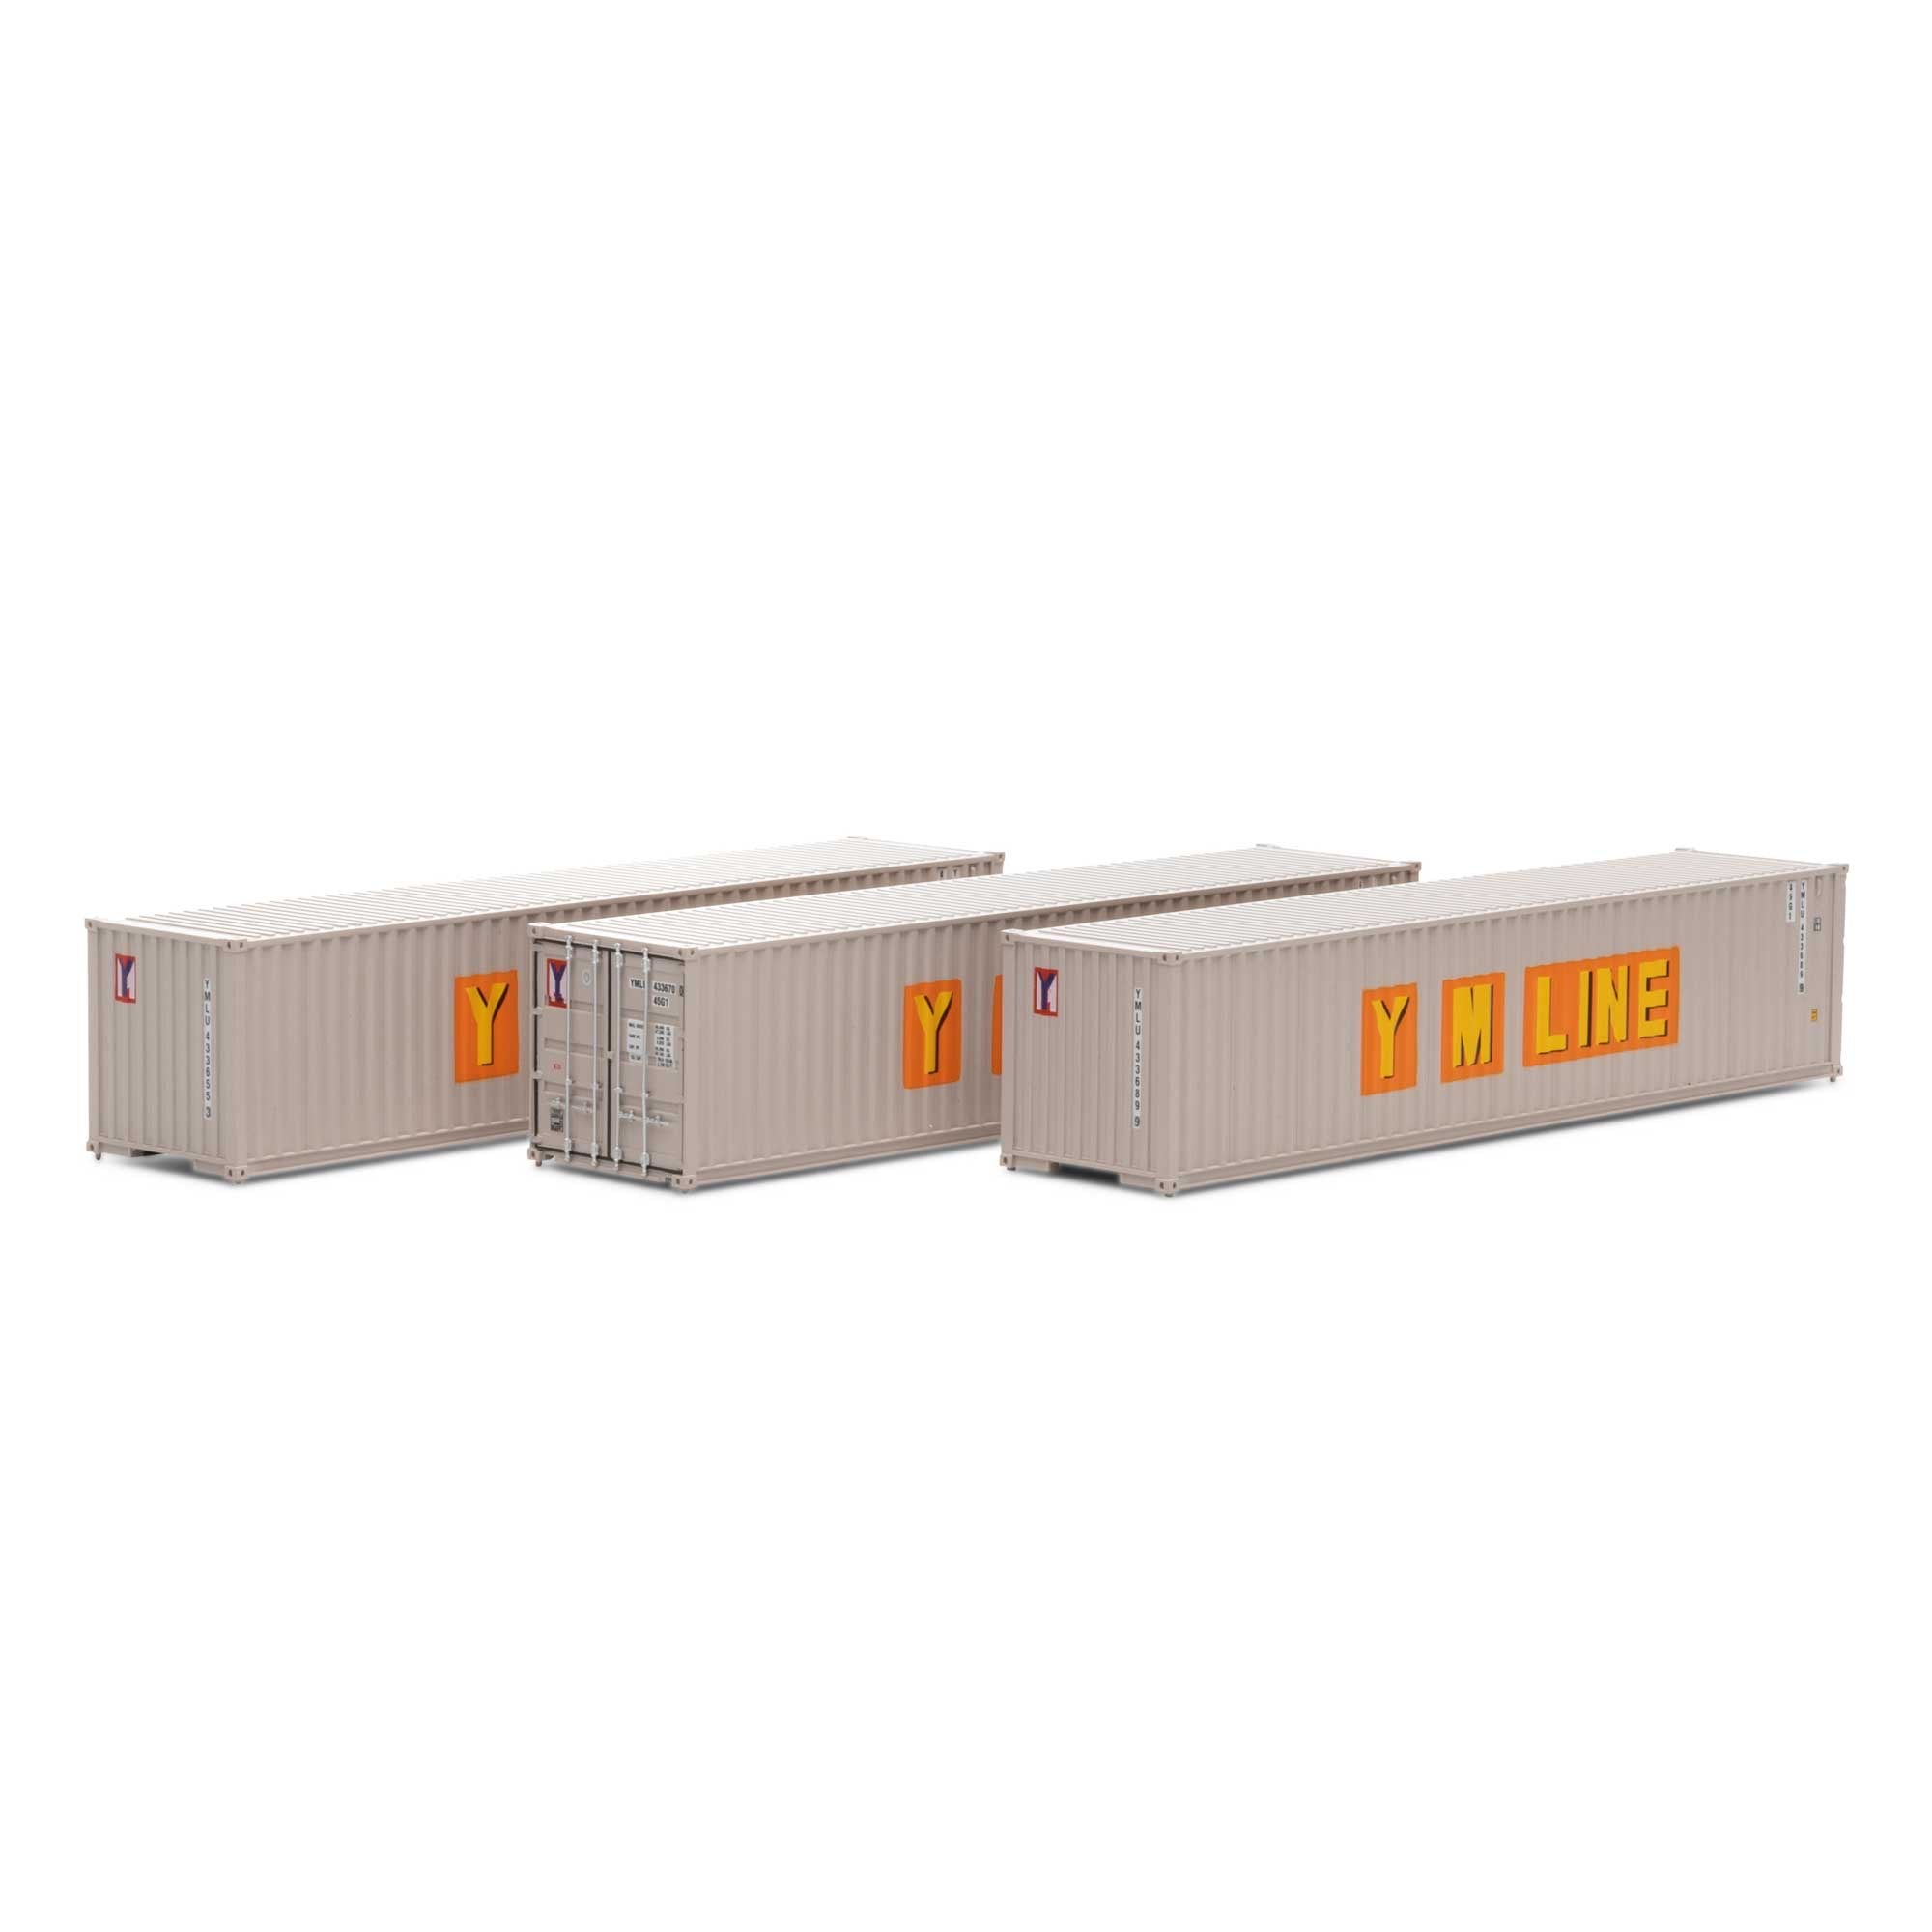 Athearn 27052 Athearn HO 40 Corrugated Low Container Yang Ming/Old 3 ATH27052 HO Vehicles - Default Title (CH-140-27052)